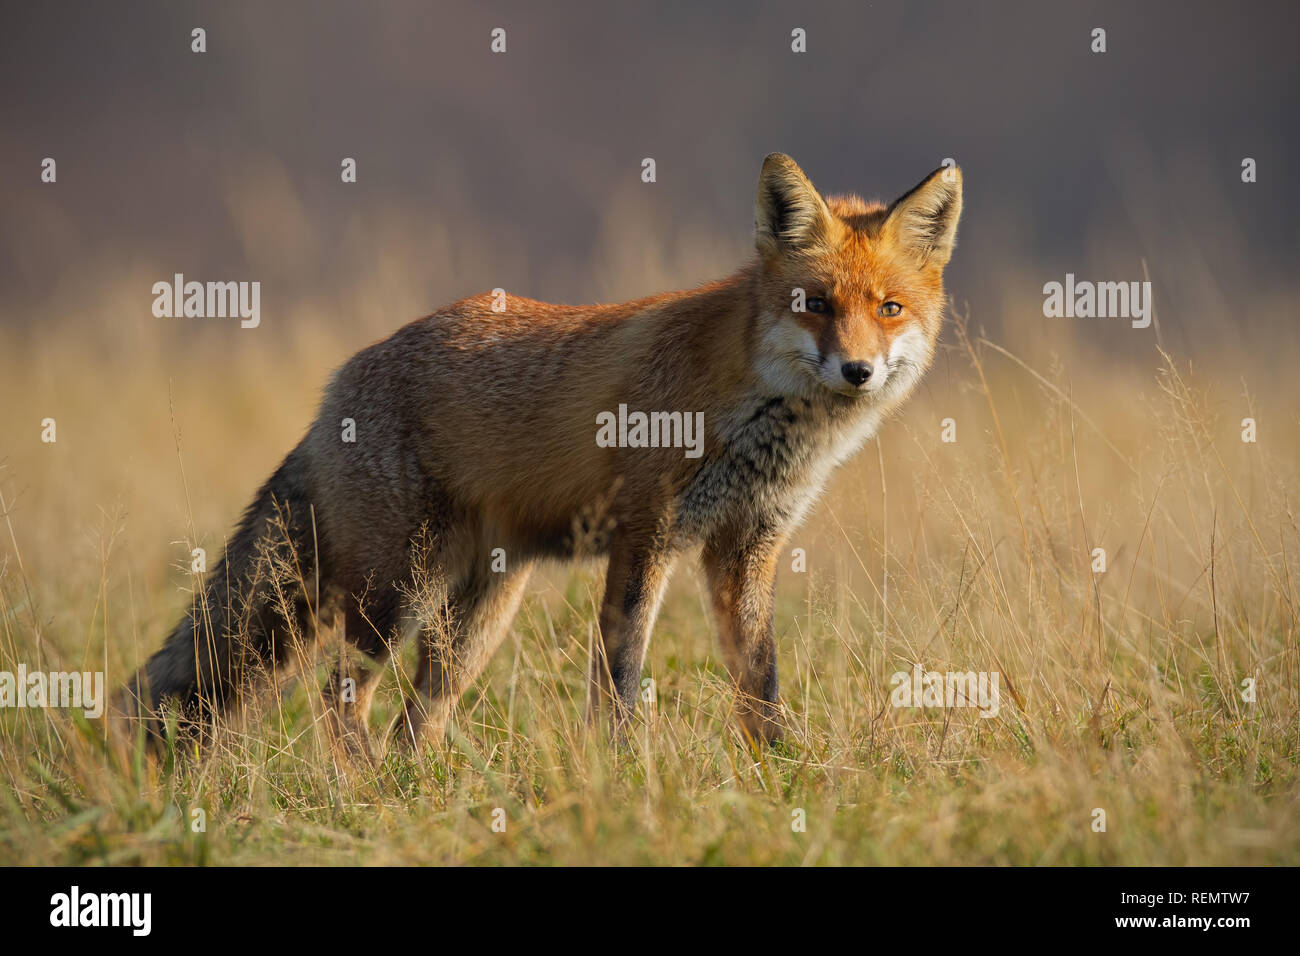 Red fox in autumn with blurred dry grass in background Stock Photo